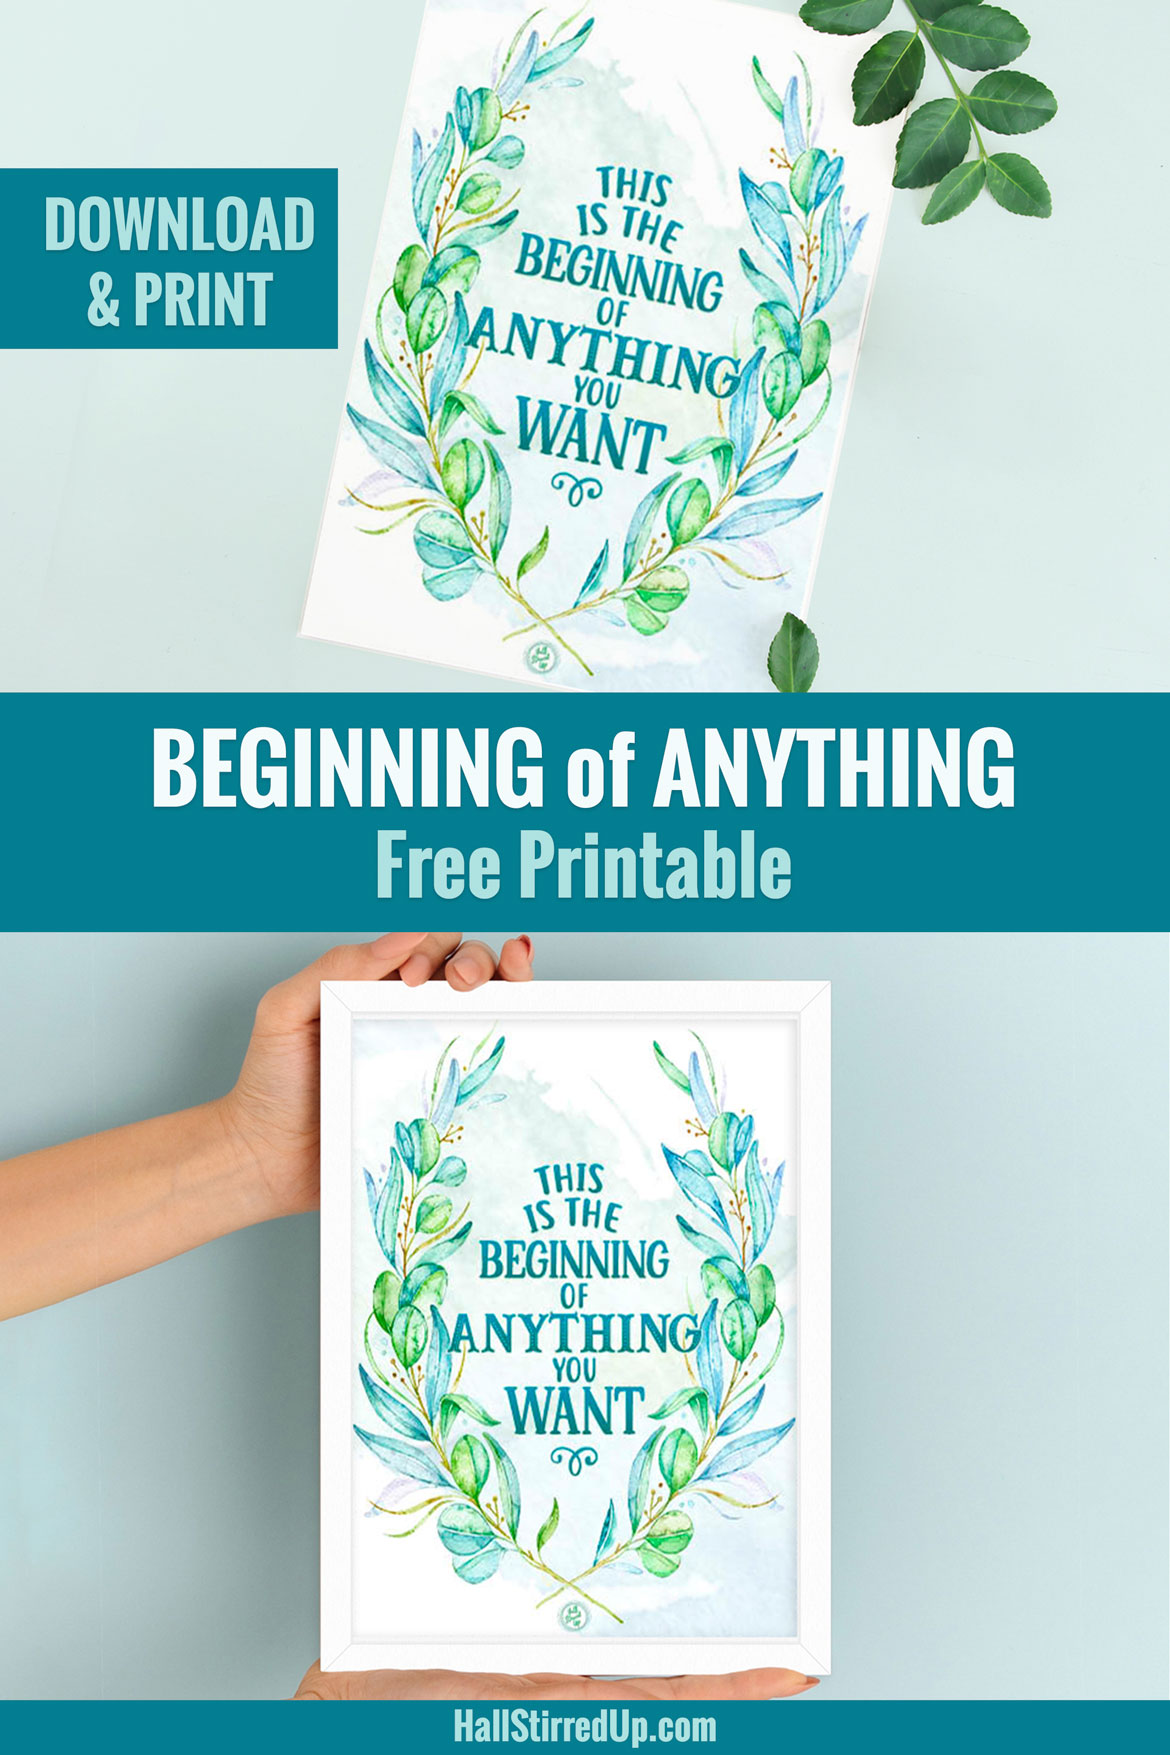 Unlock your potential with a new mindset Includes free 'Beginning of Anything' printable